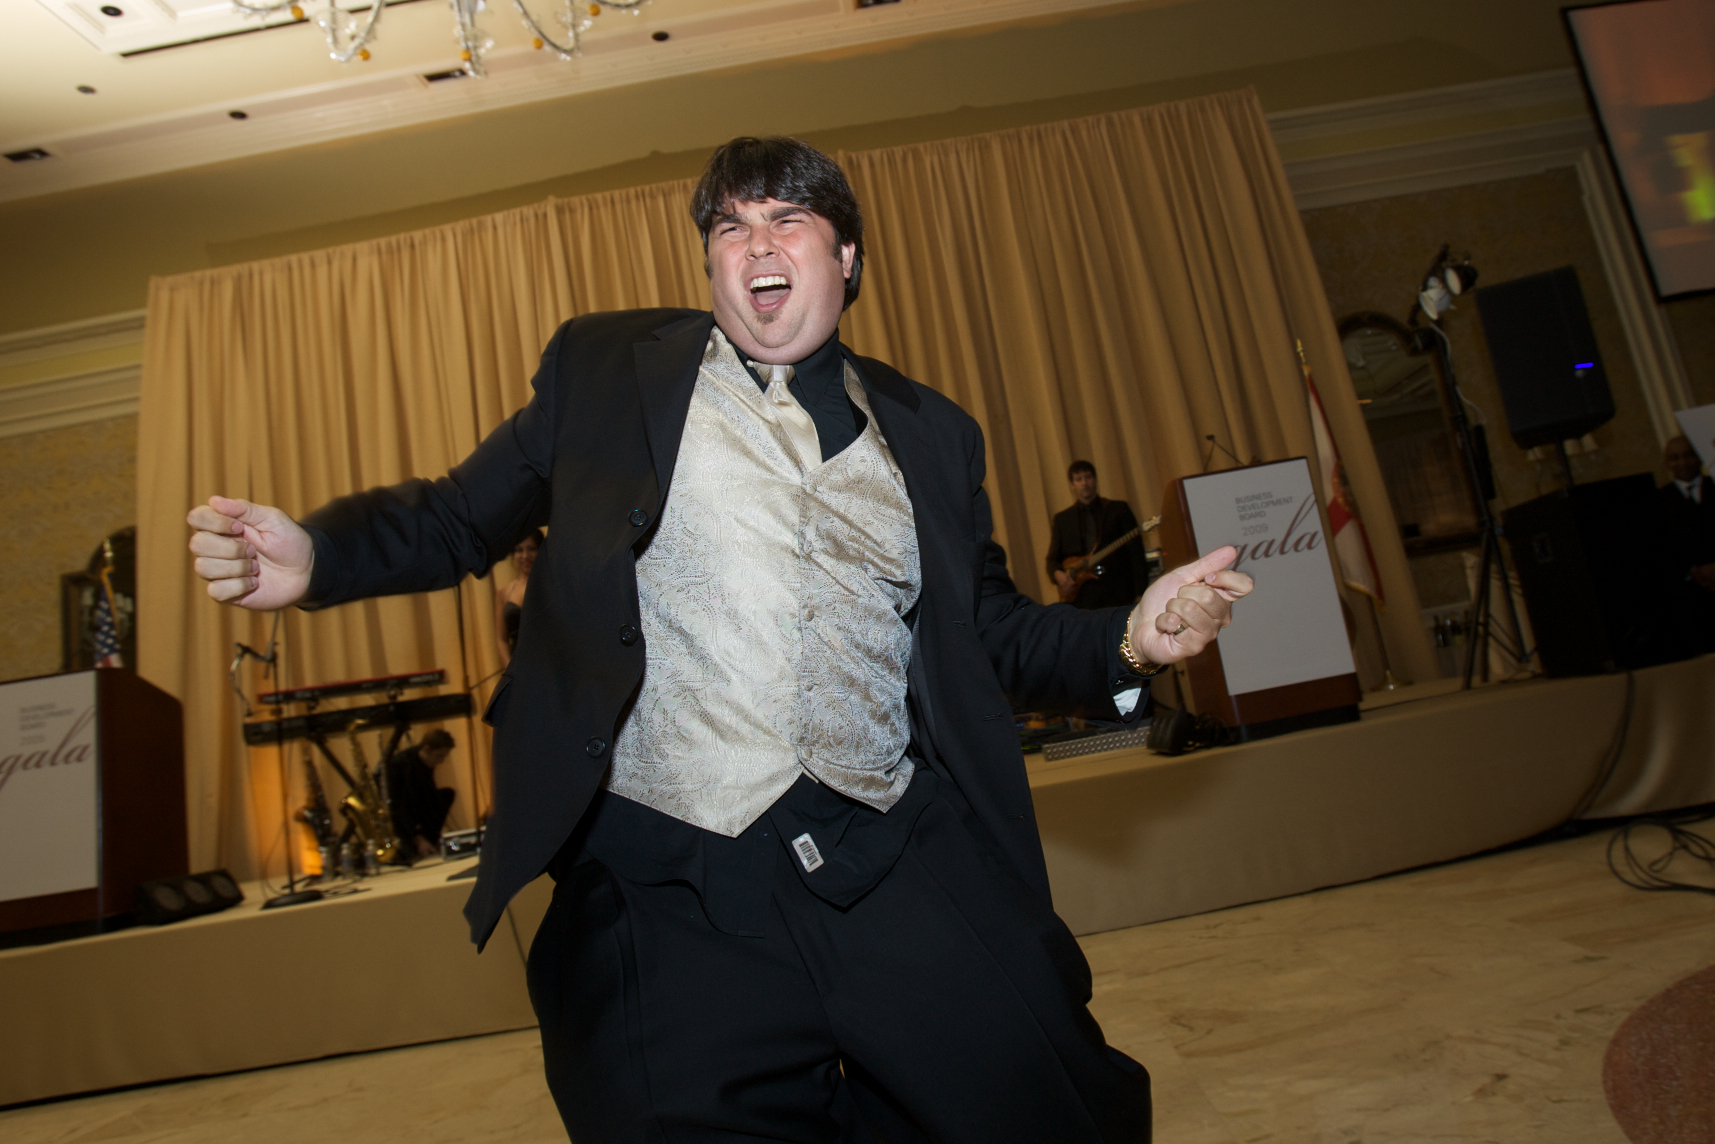 Arthur L. Bernstein dancing to Michael Jackson Thriller at the Breakers Hotel in Palm Beach for the Business Development Board Gala for a Dance Off